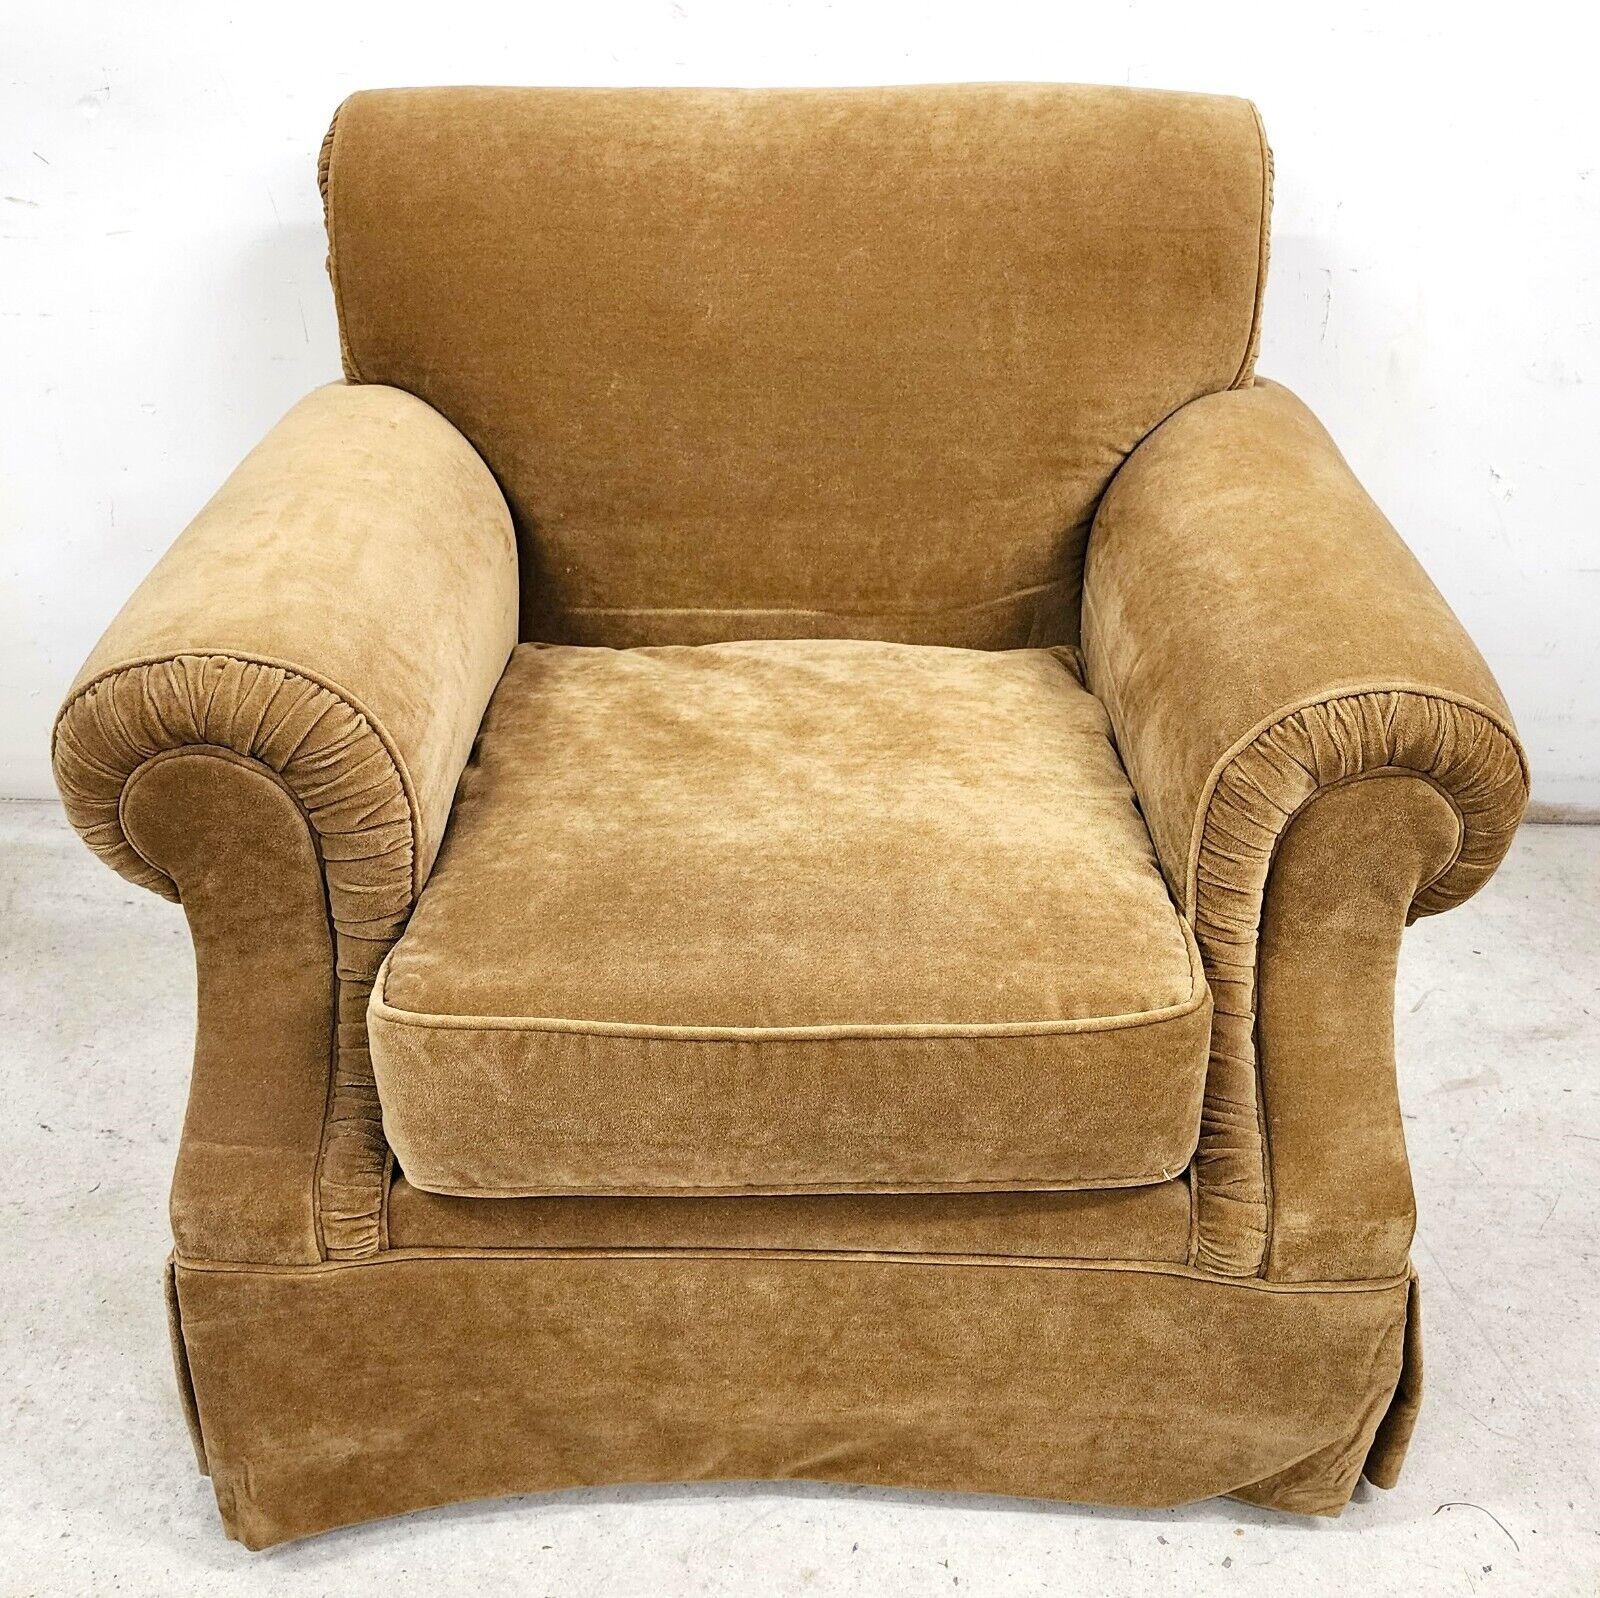 Offering one of our recent palm beach estate fine furniture acquisitions of a
Lounge club chair oversized by DREXEL
With very soft faux suede velvet fabric.
Coloration: Olive Green bordering on Brown

Approximate measurements in inches
37